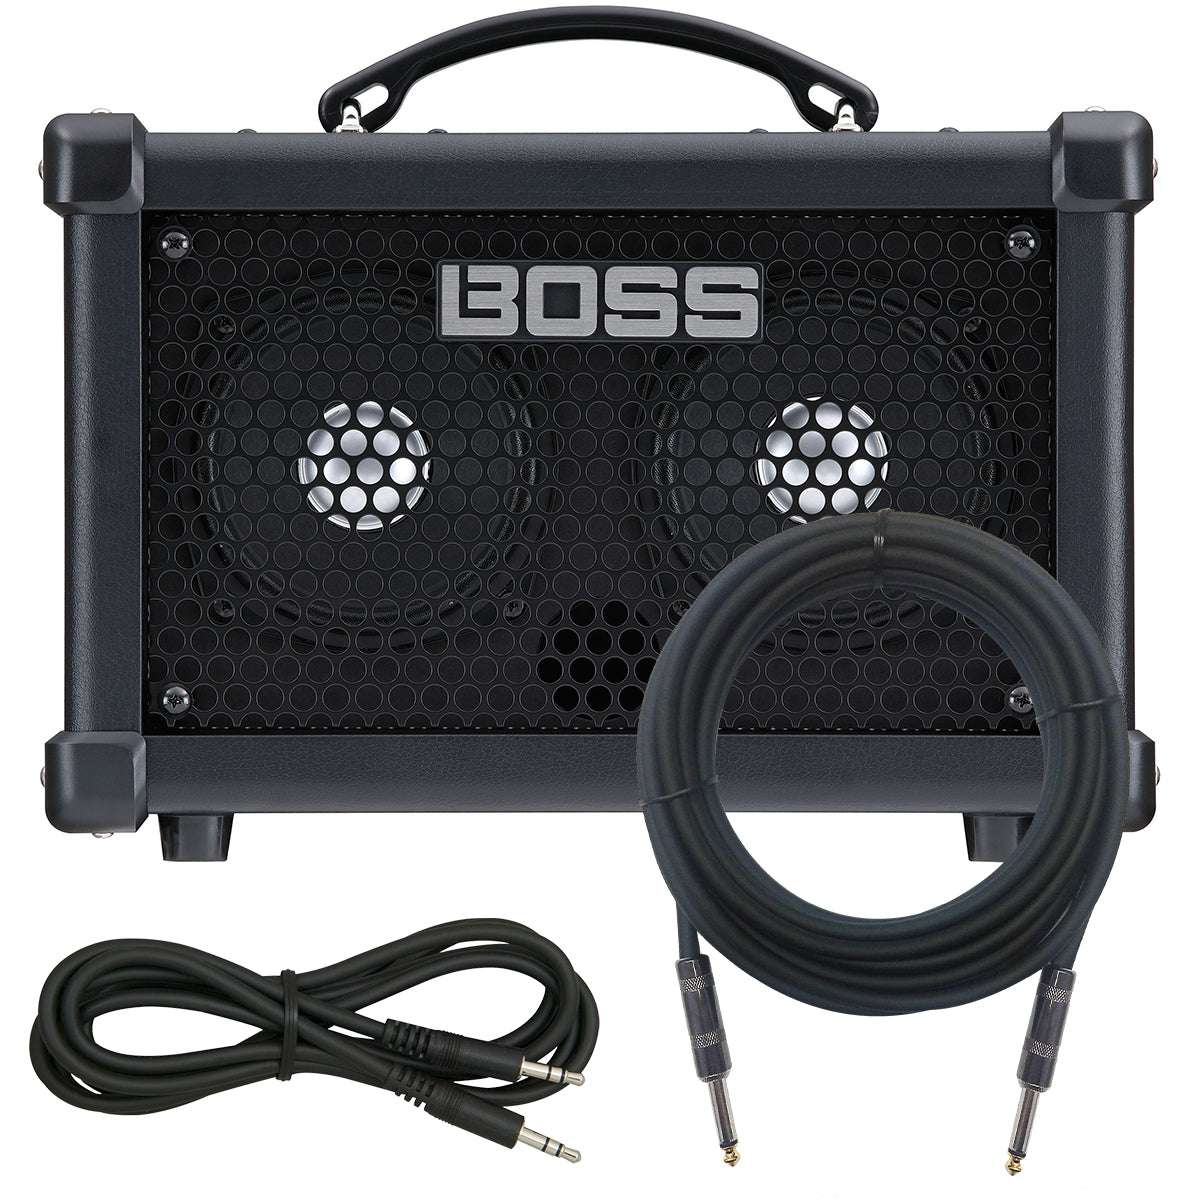 Collage of the components in the BOSS Dual Cube Bass LX Amplifier CABLE KIT bundle